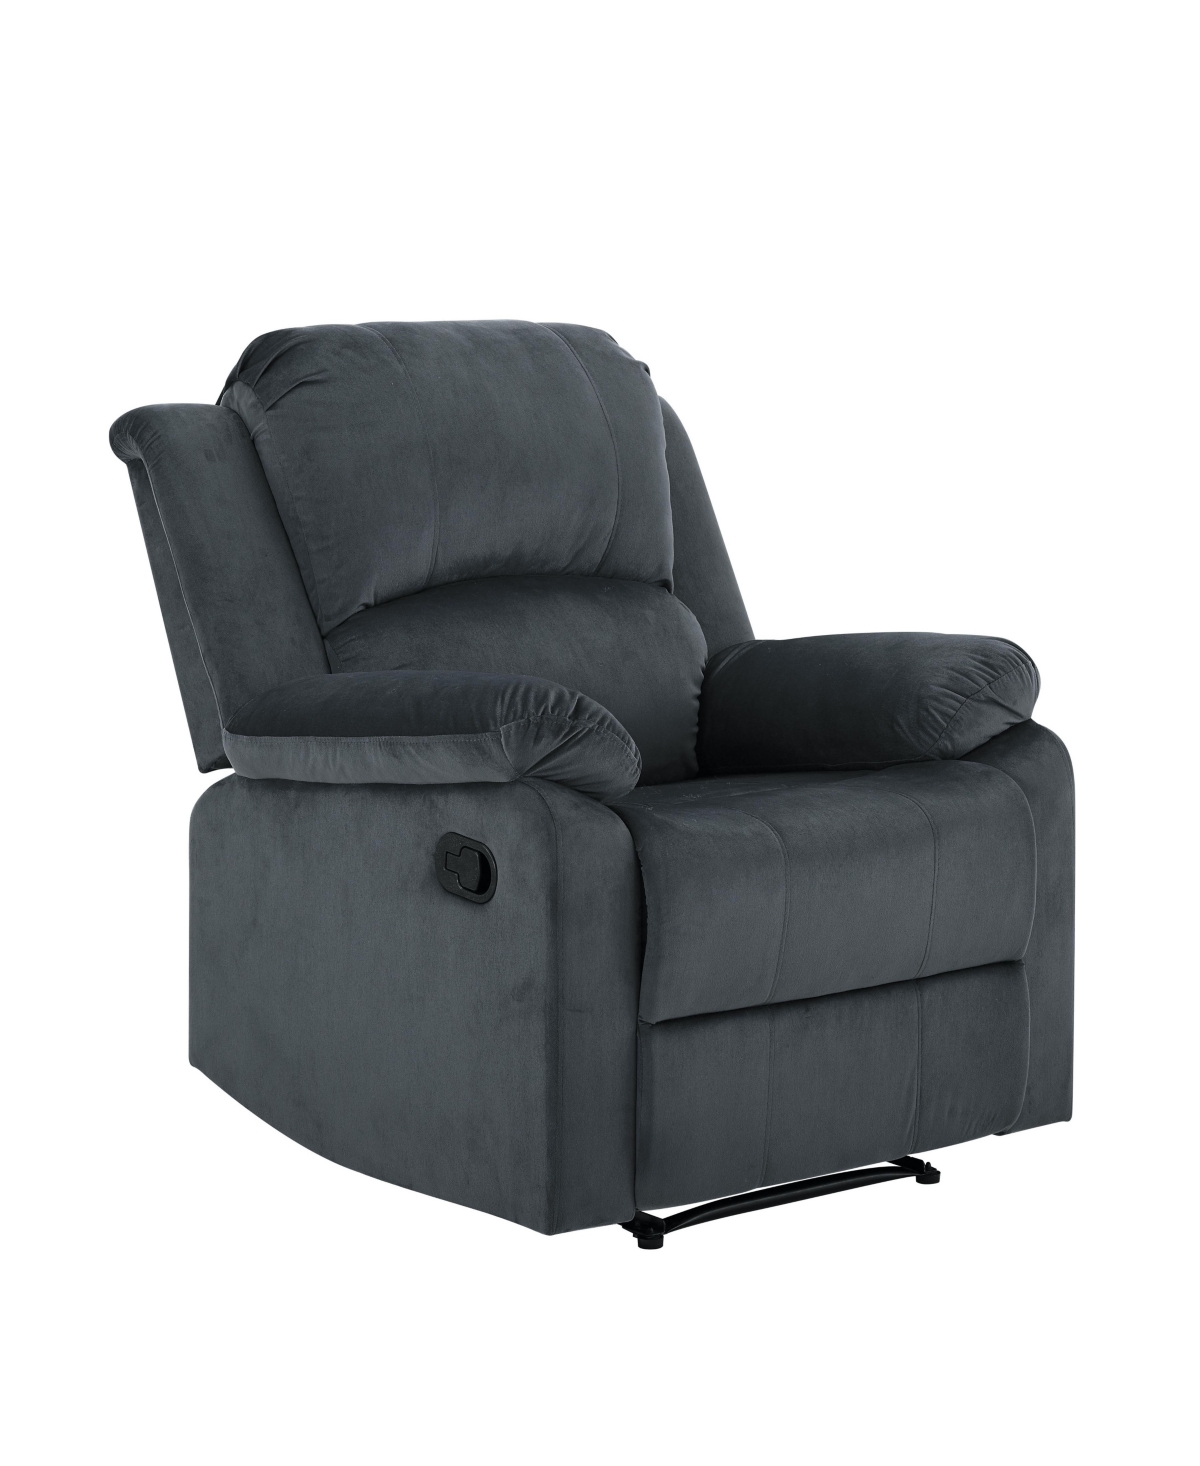 Relax A Lounger 34.75" Steel Dayton Microfiber Manual Recliner In Gray